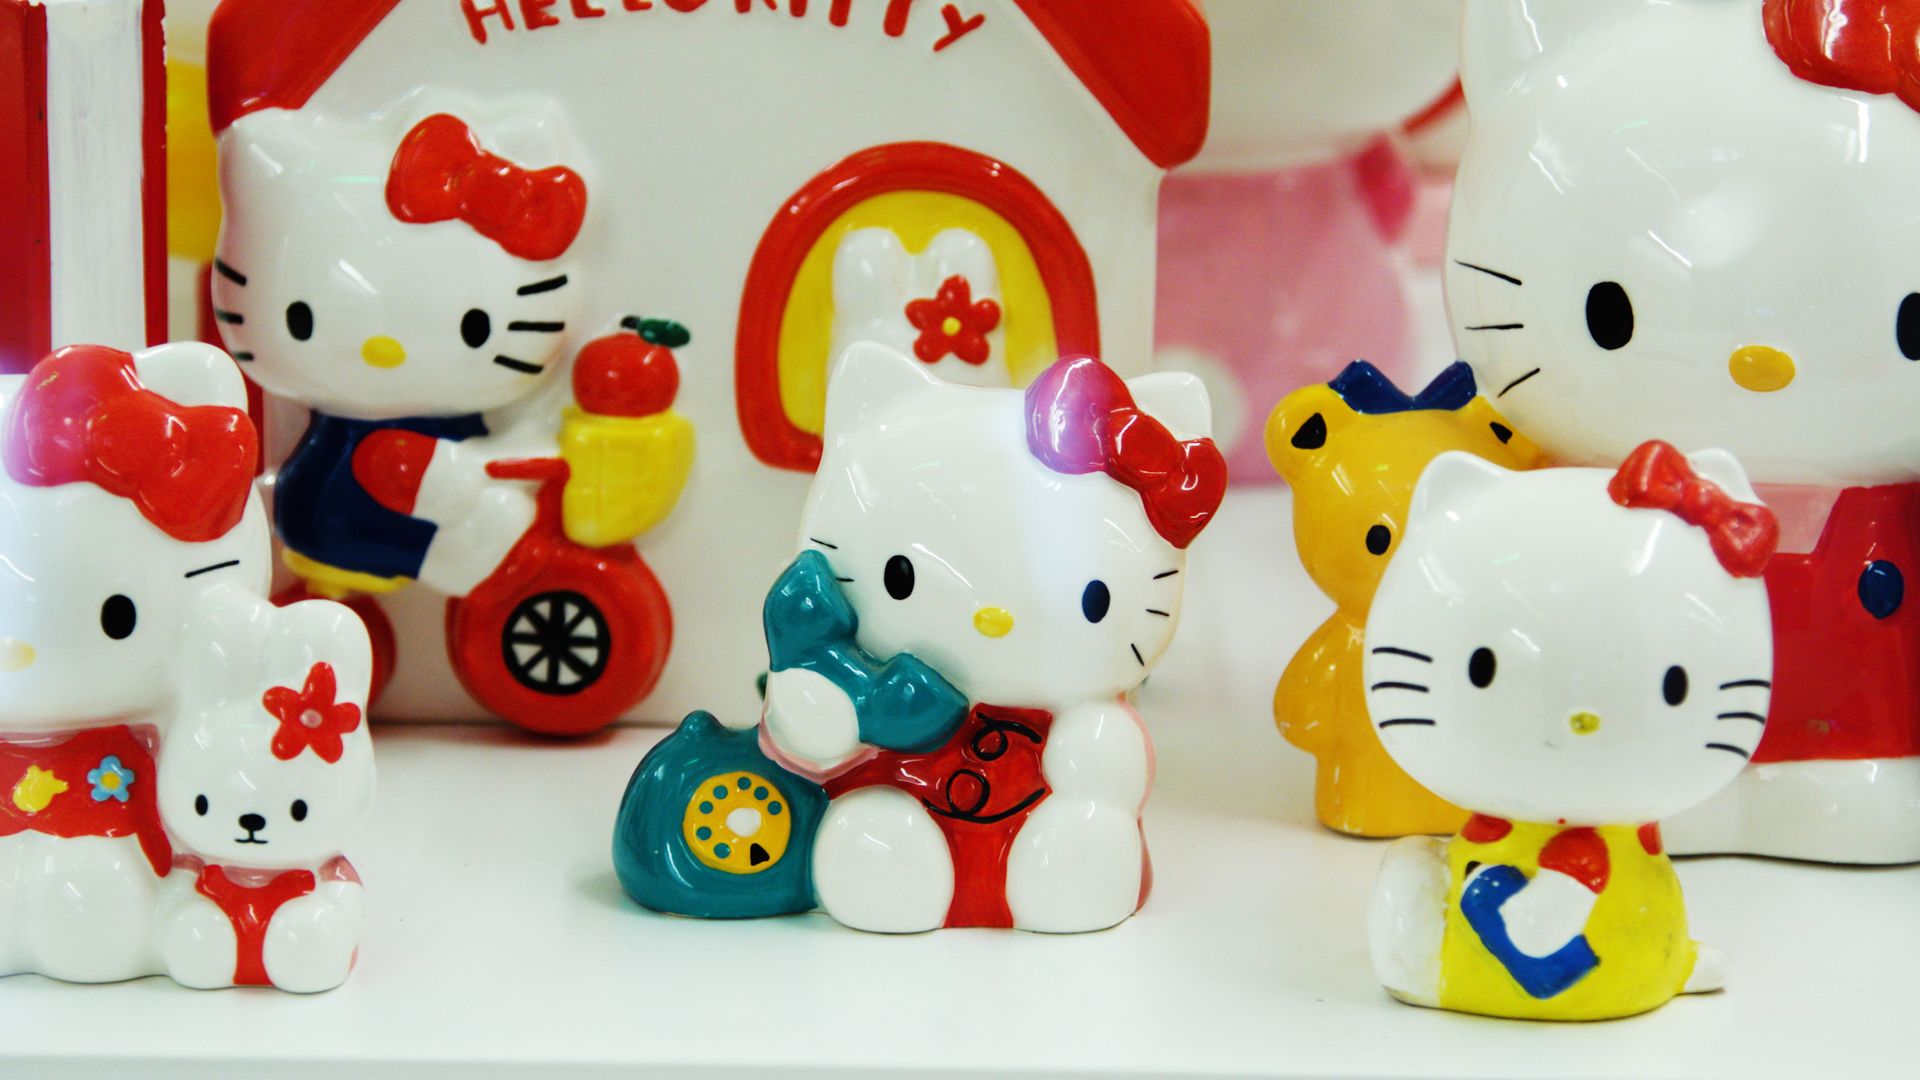 Hello Kitty Cafe - Introducing a new way to stay stylish and